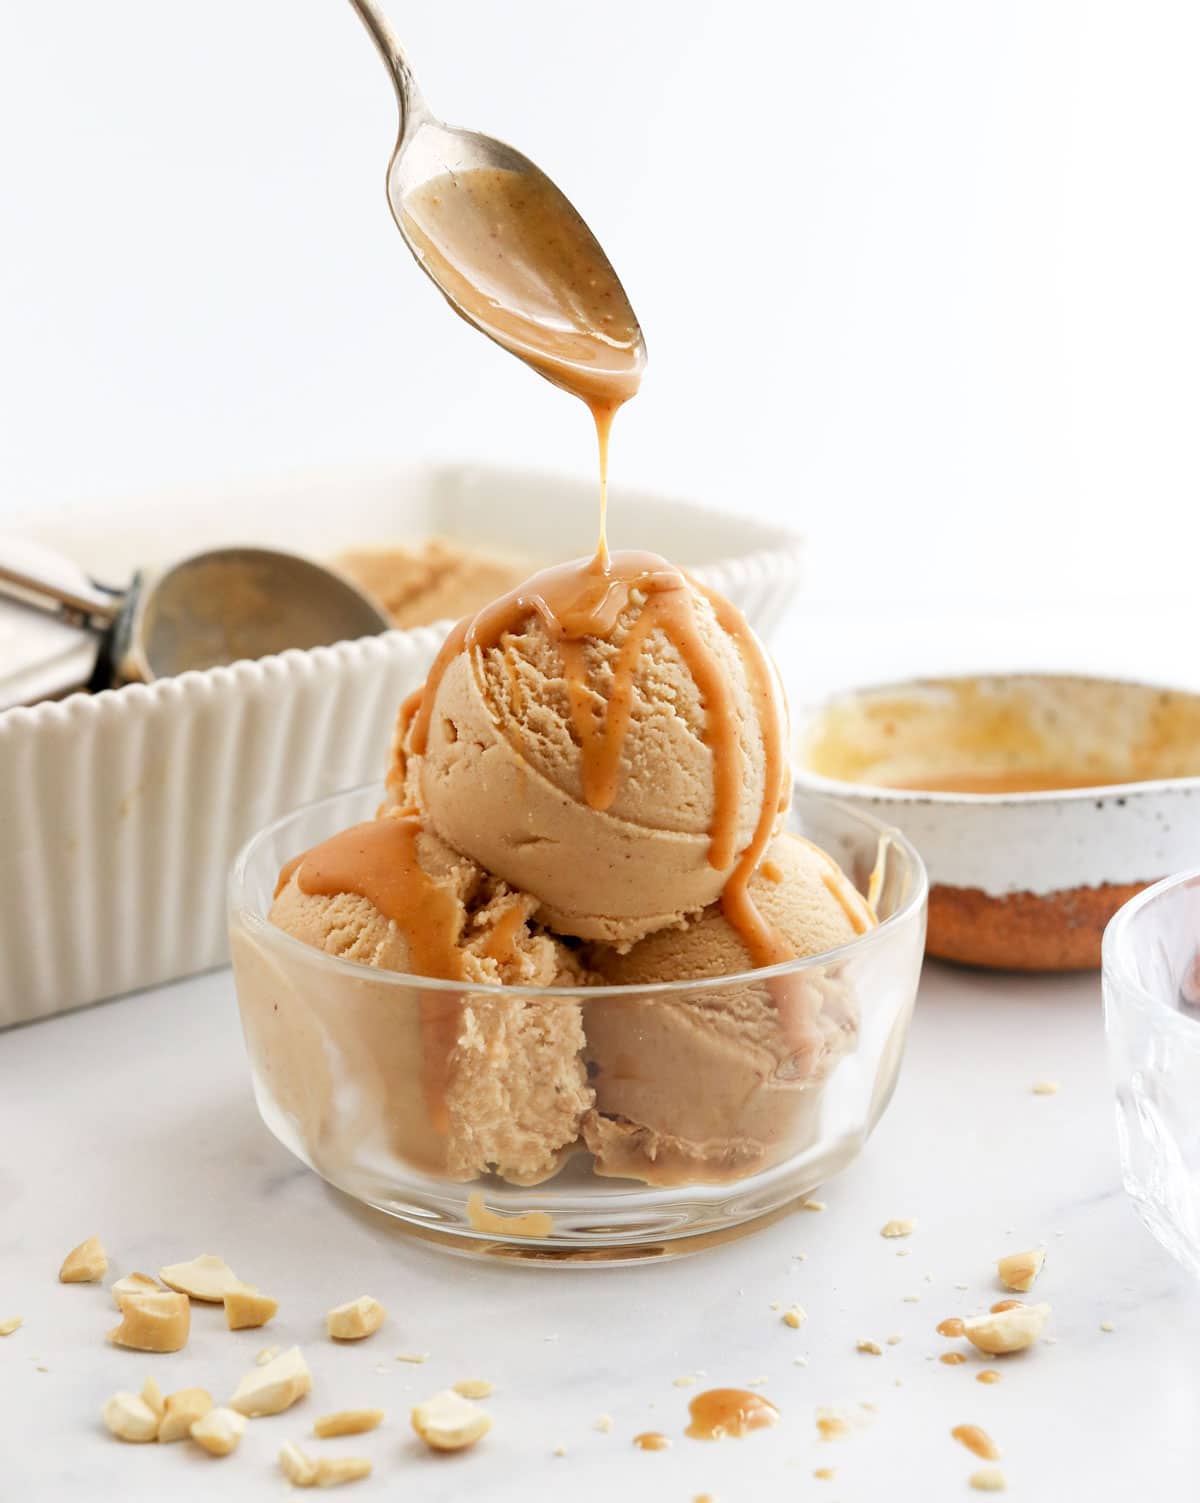 peanut butter ice cream with peanut butter shell topping